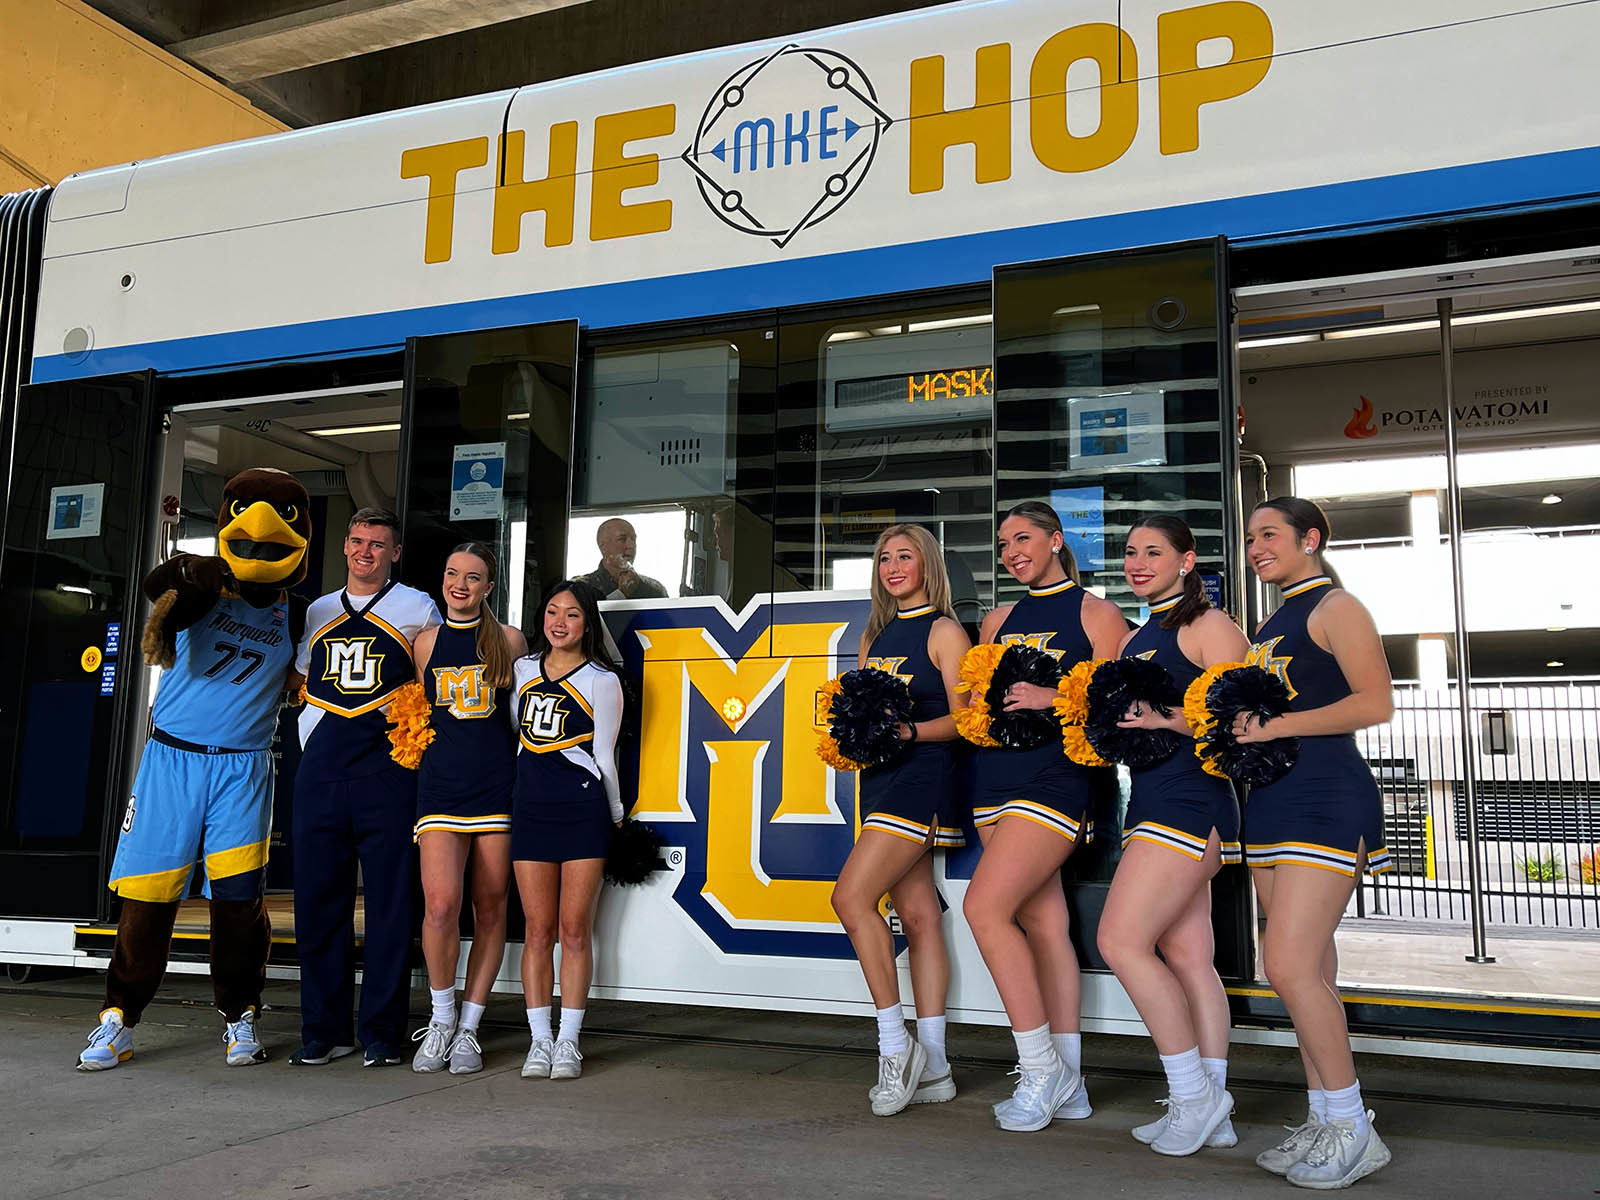 In honor of home openers, The Hop unveils Marquette hoops streetcar